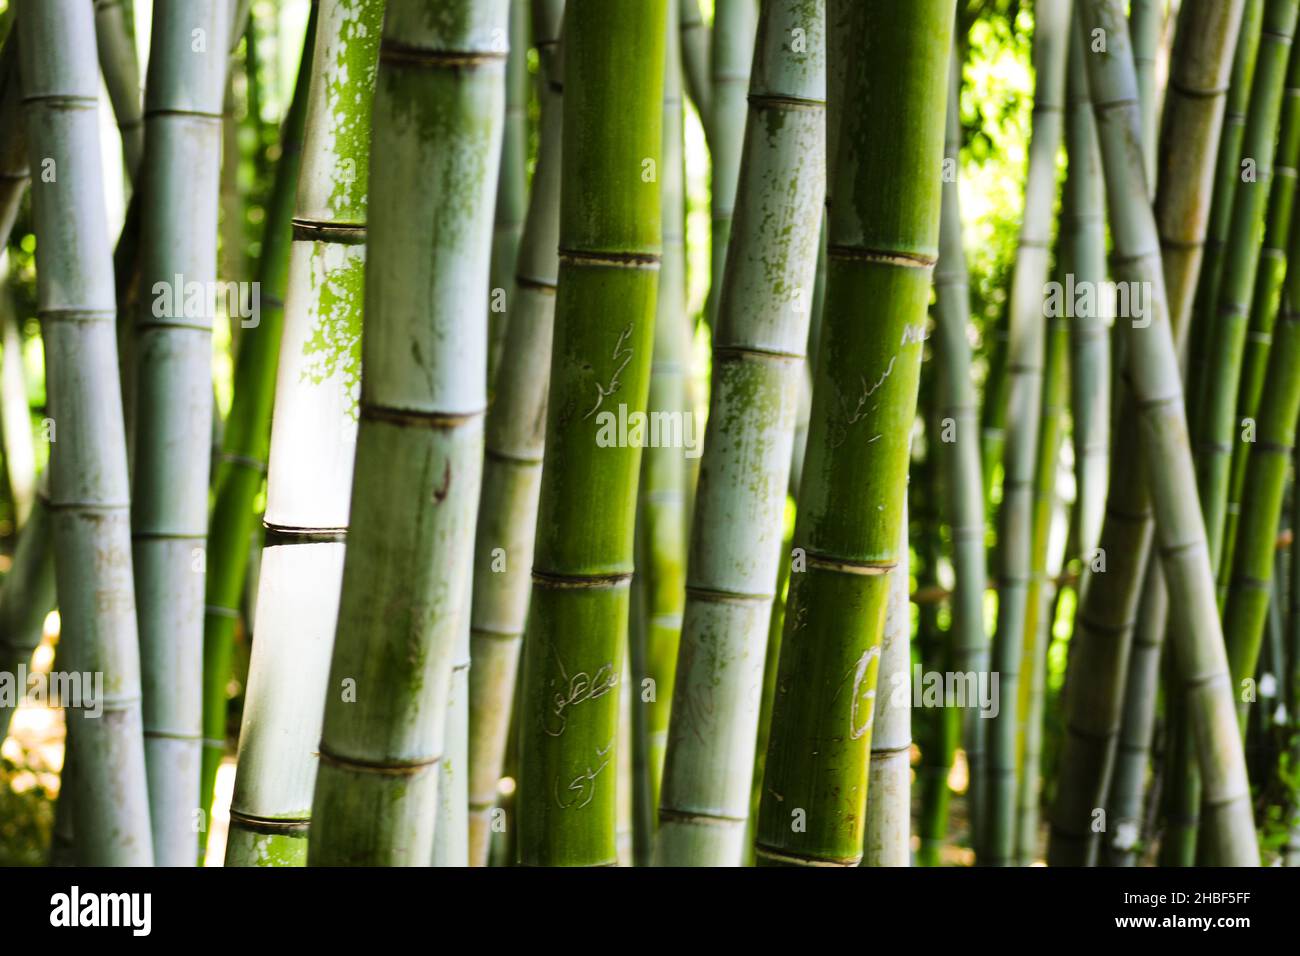 Bamboo Forest in Huntington Gardens, Los Angeles, California Stock Photo